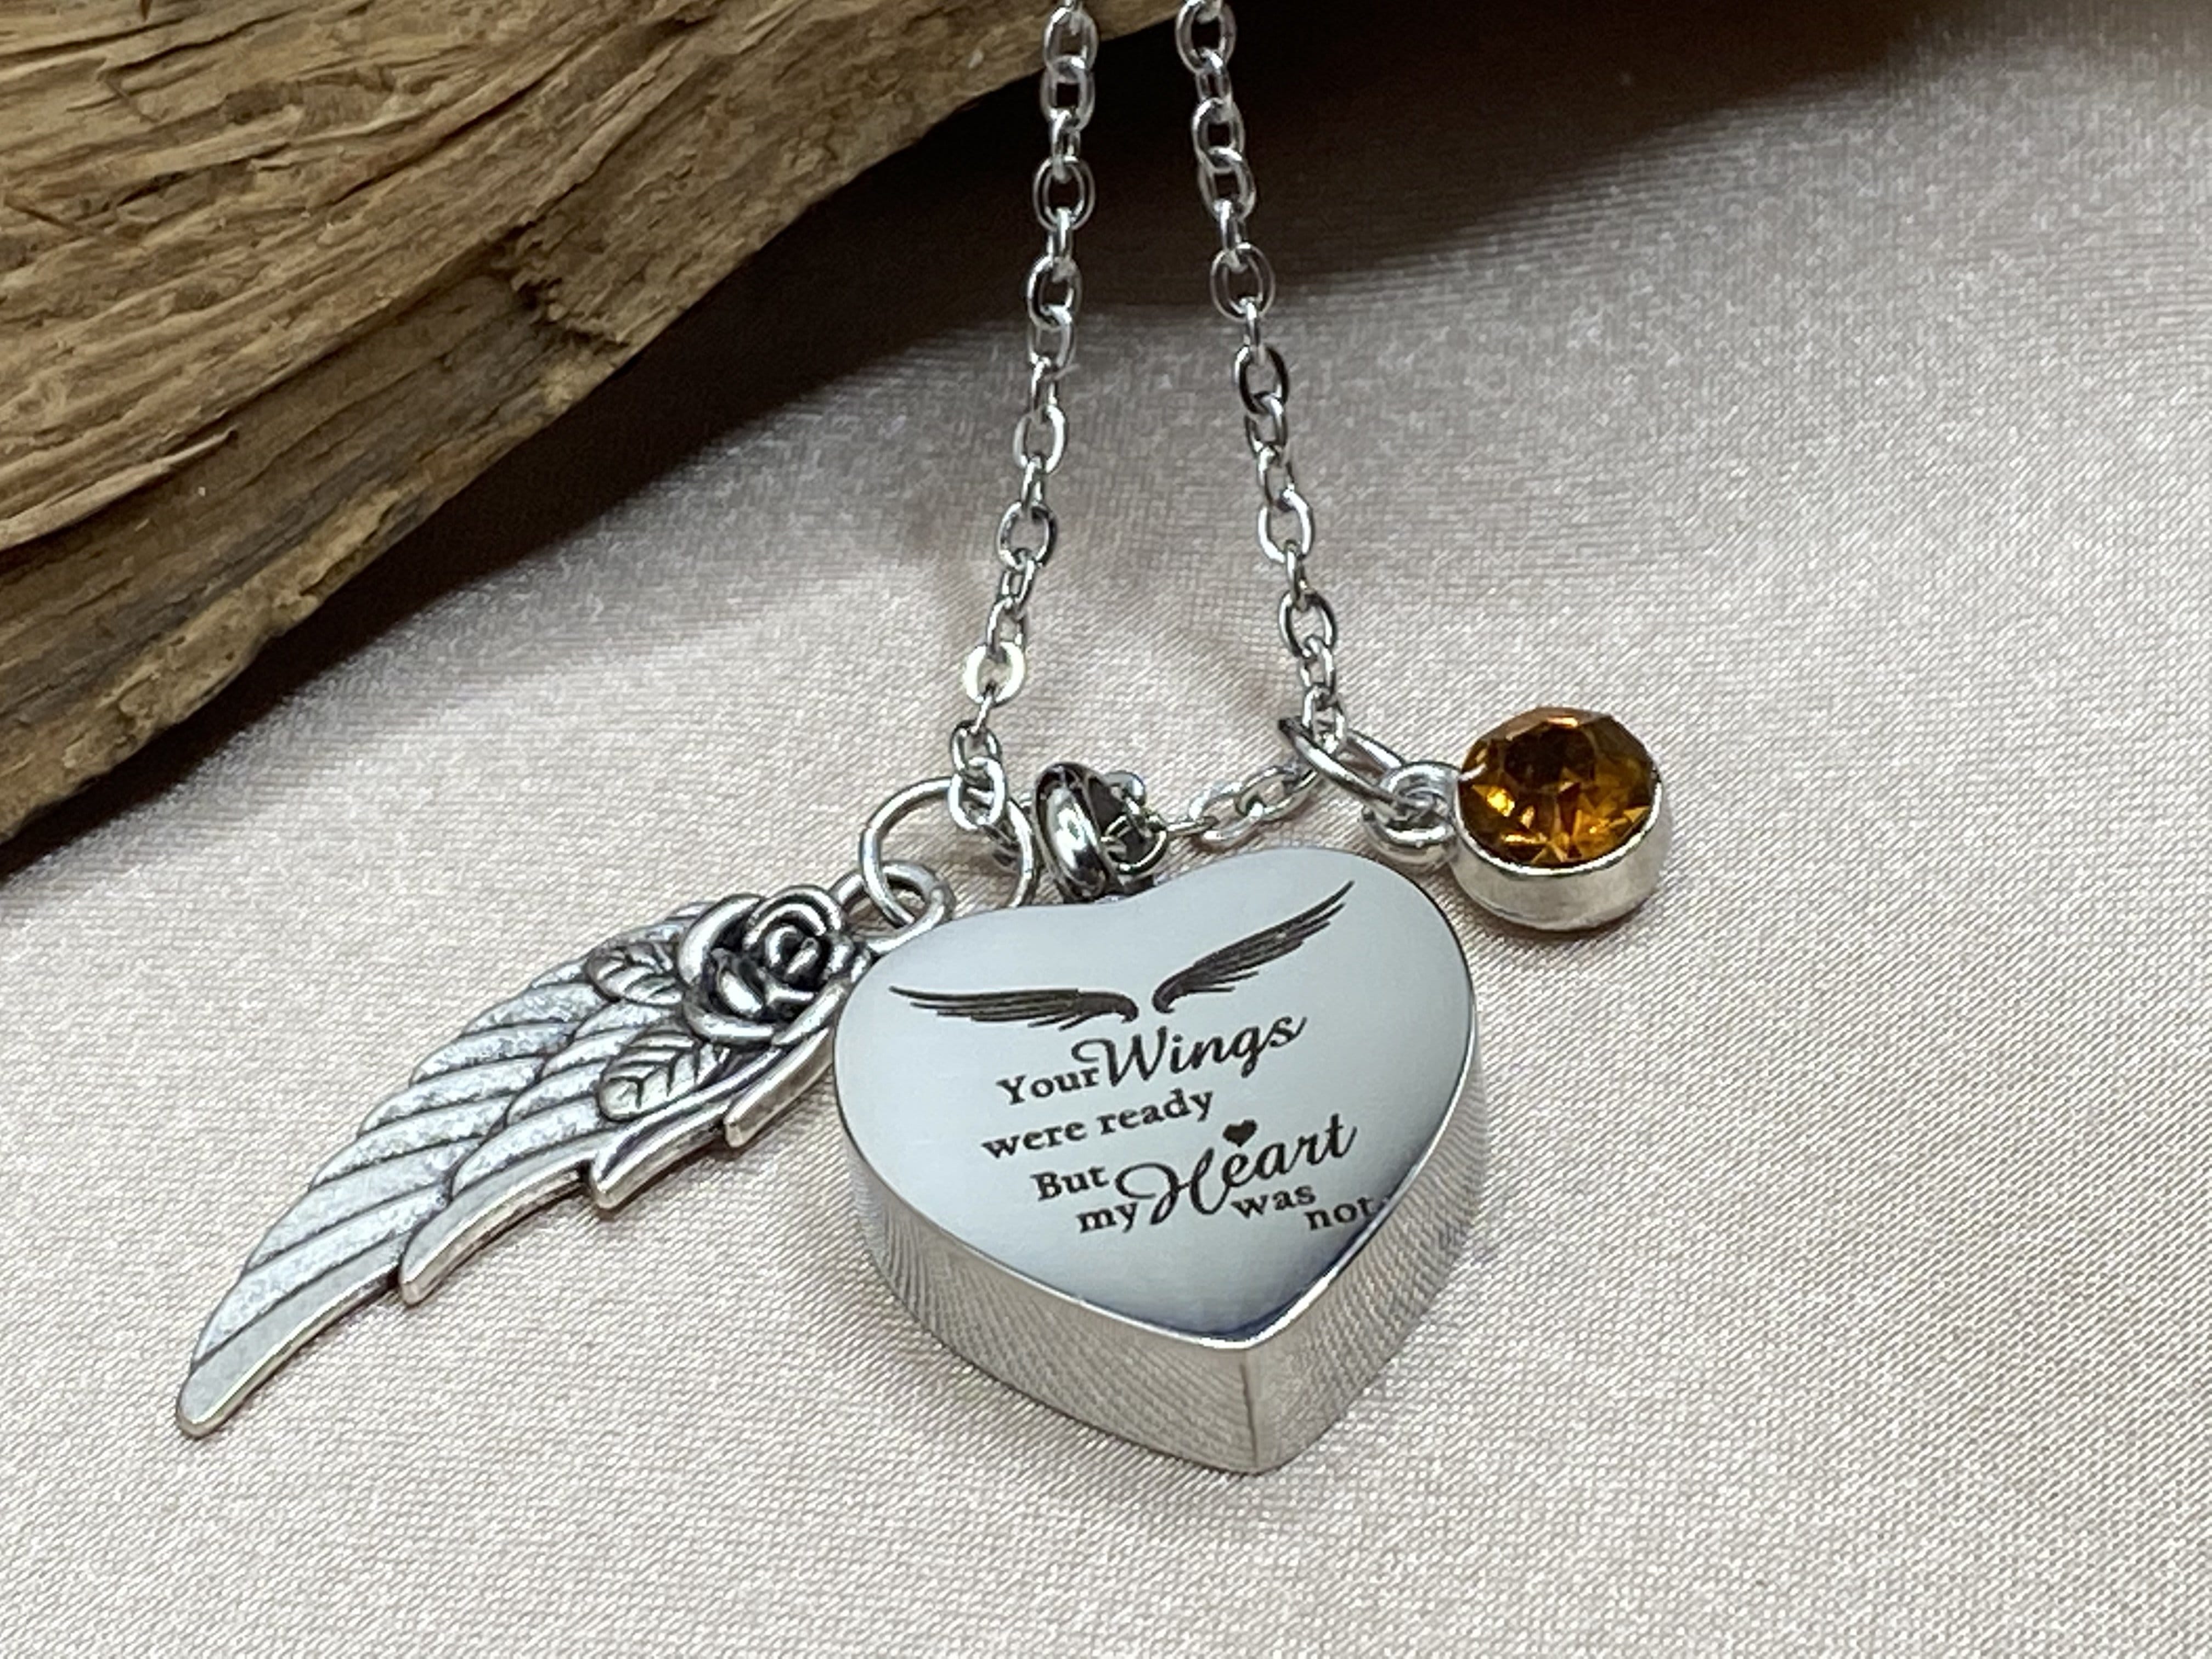 Cremation jewelry that hold ashes. It's an urn necklace that holds ashes  for loved ones like family… | Cremation jewelry necklaces, Cremation  jewelry, Ashes jewelry